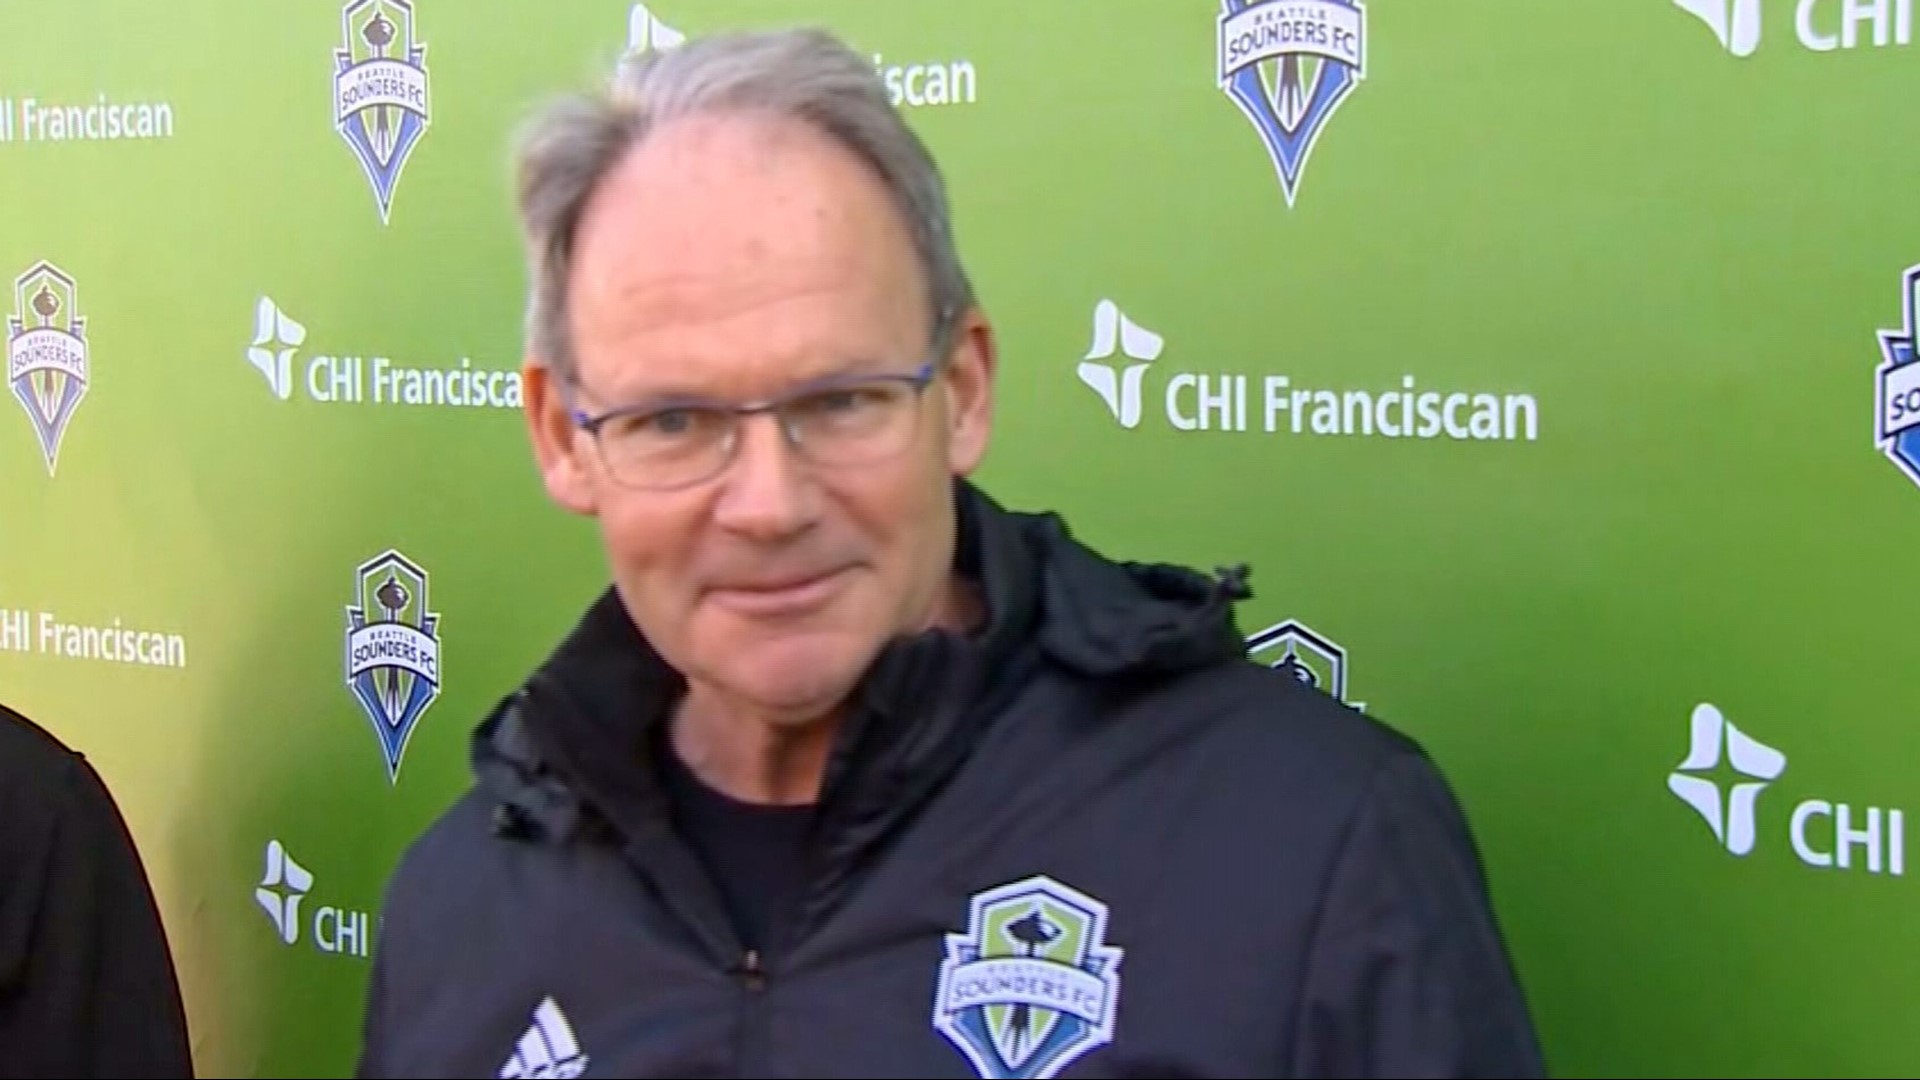 Seattle Sounders Head Coach Brian Schmetzer said Friday that tickets to the MLS Cup at Seattle’s CenturyLink Field sold out the same day they went on sale.